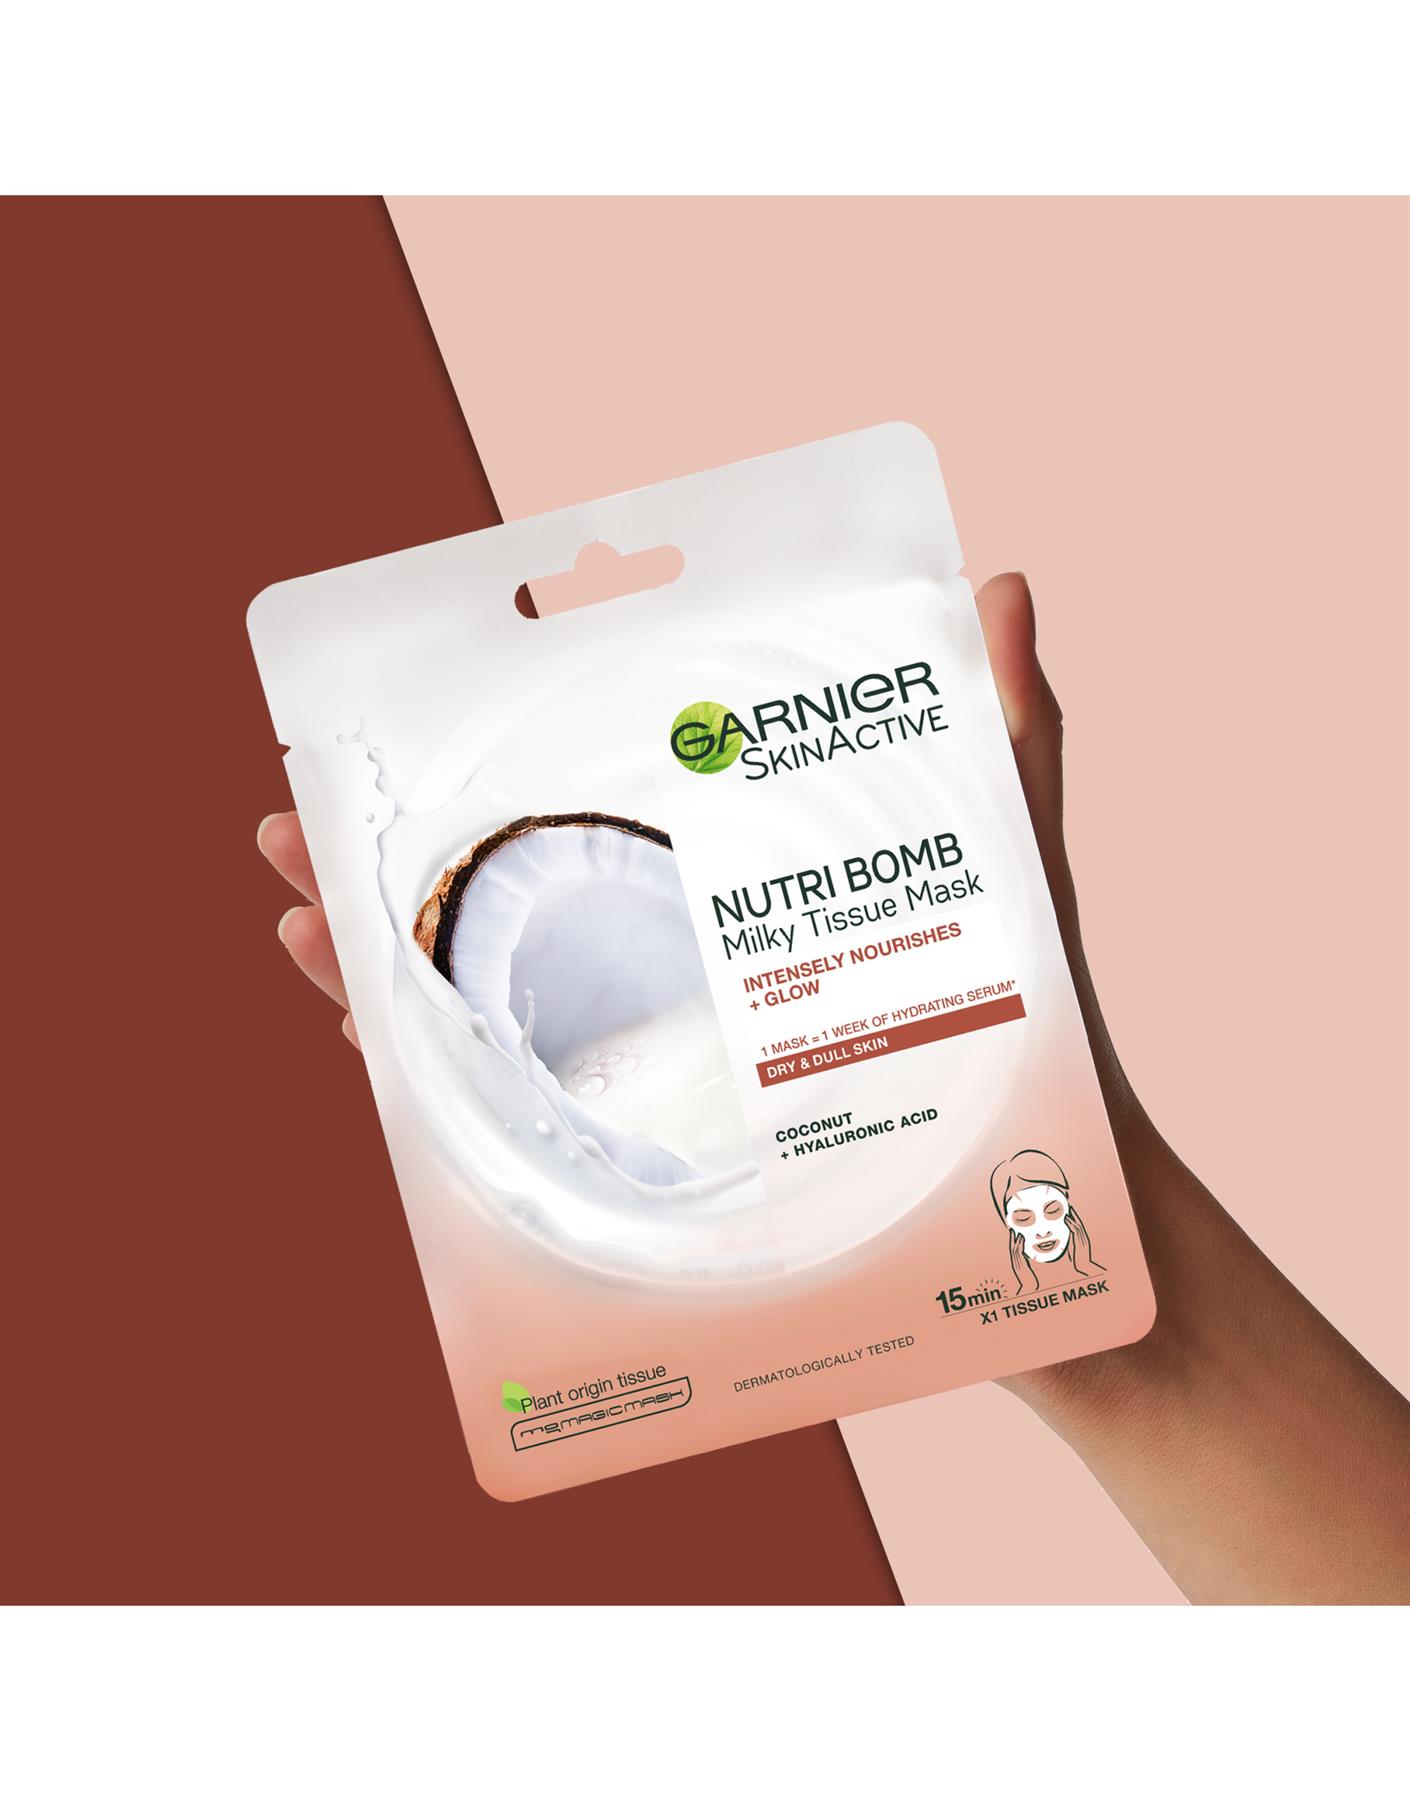 Garnier Nutri Bomb Milky Face Sheet Mask Coconut and Hyaluronic Acid for Hydrated Glowing Skin 28g